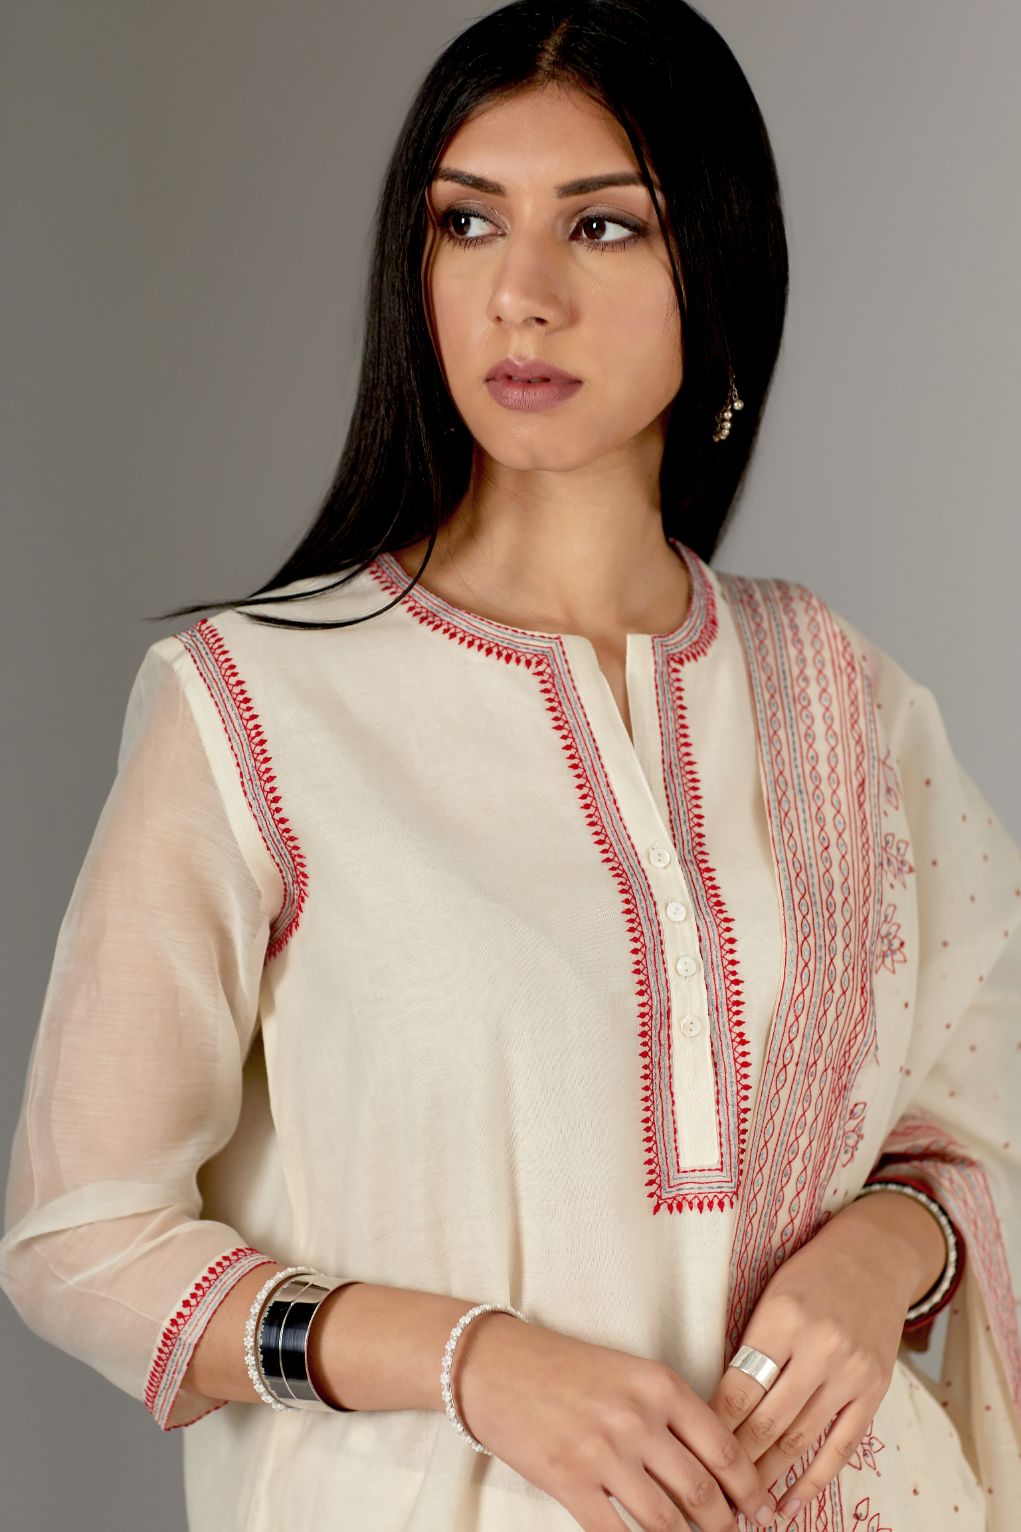 Straight Kurta set detailed with fine contrast thread embroidery.